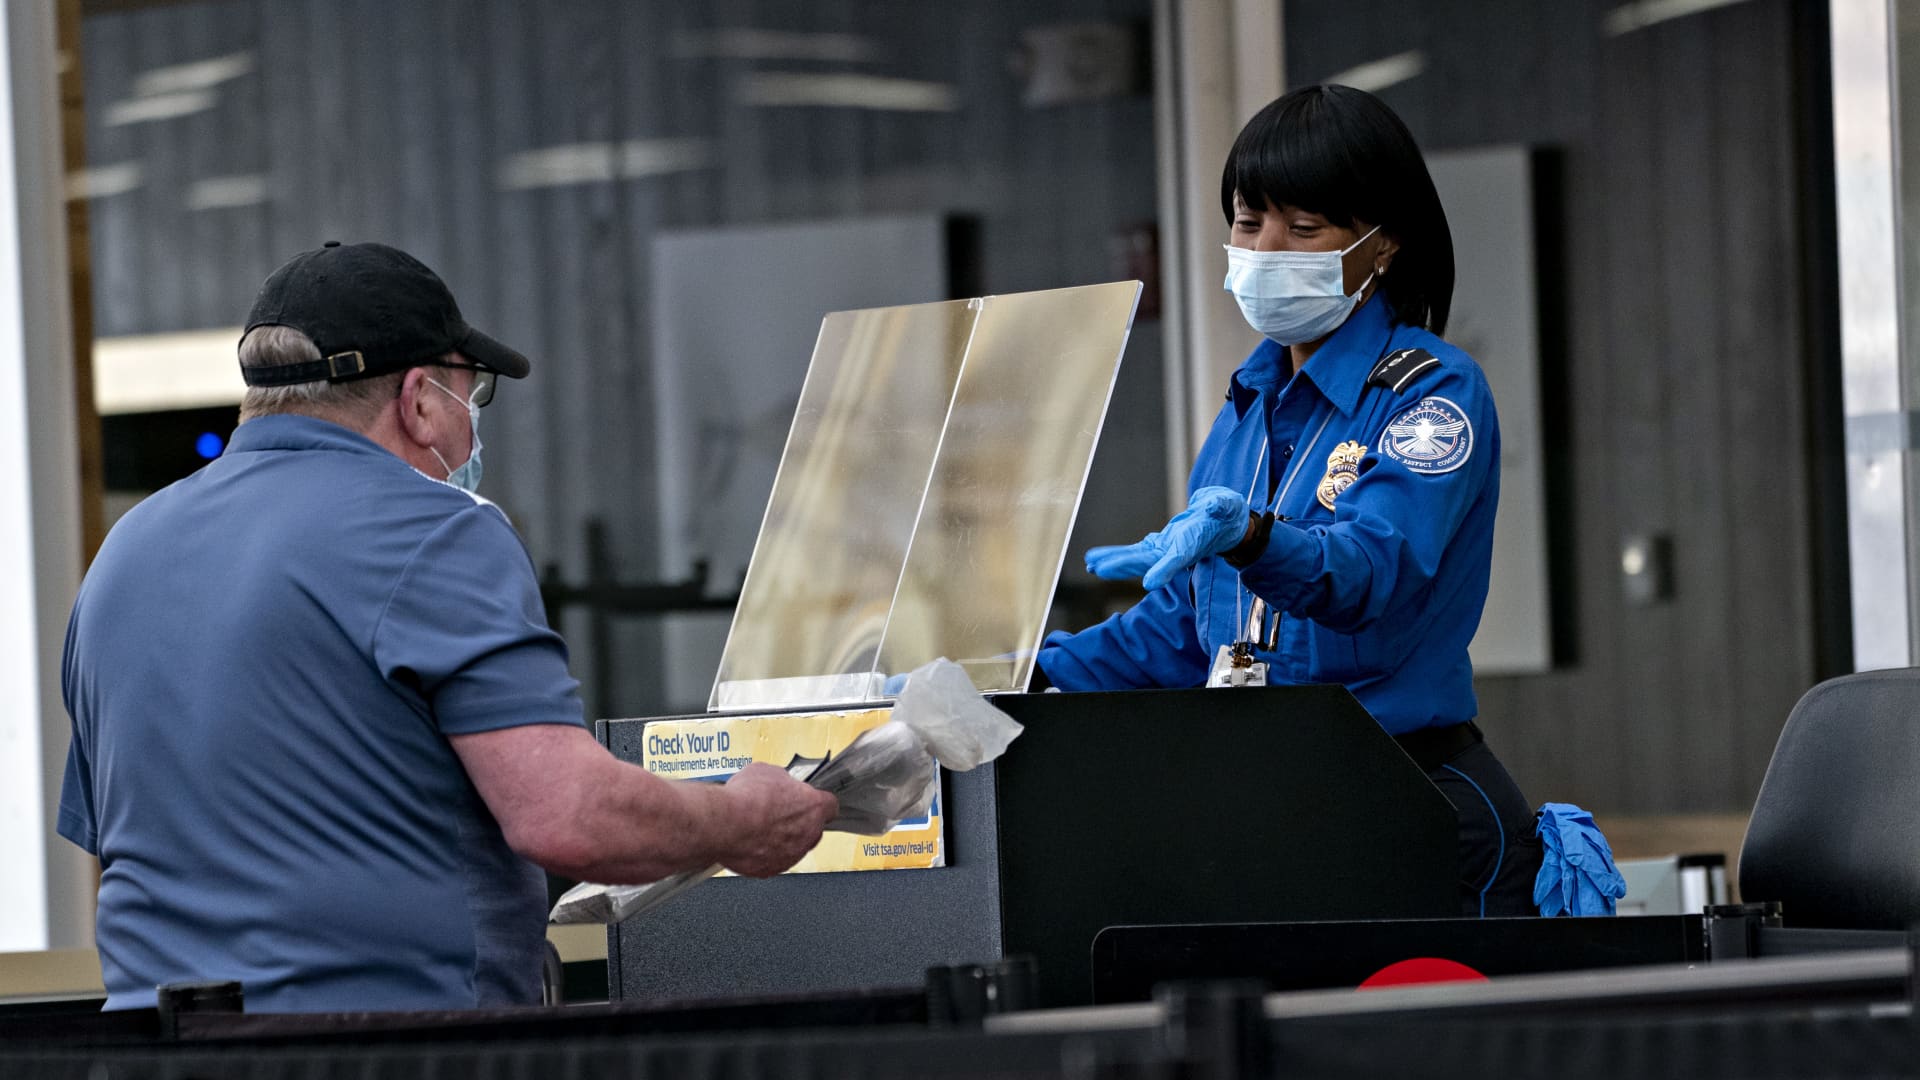 A Transportation Security Administration (TSA) agent wears a protective mask and stands behind a protective barrier while screening a traveler at Ronald Reagan National Airport (DCA) in Arlington, Virginia, U.S., on Tuesday, June 9, 2020.